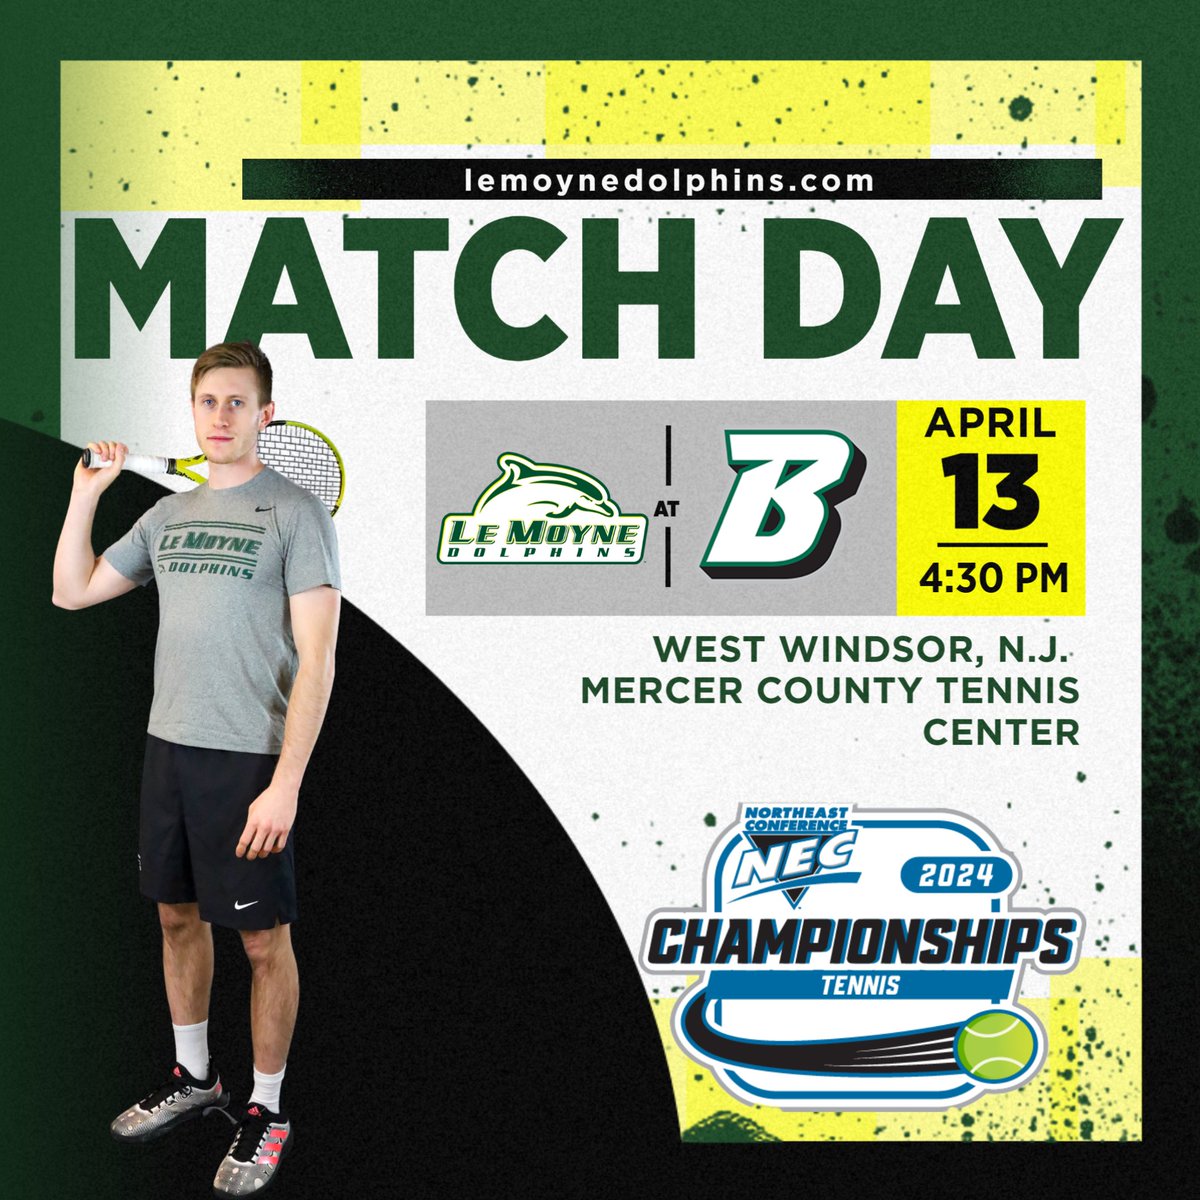 It's MATCH DAY!! and the semifinals of the NEC Championship! 🆚 Binghamton University Bearcats 🏟️ Mercer County Tennis Center - West Windsor, N.J. ⏰ Not before 4:30 PM